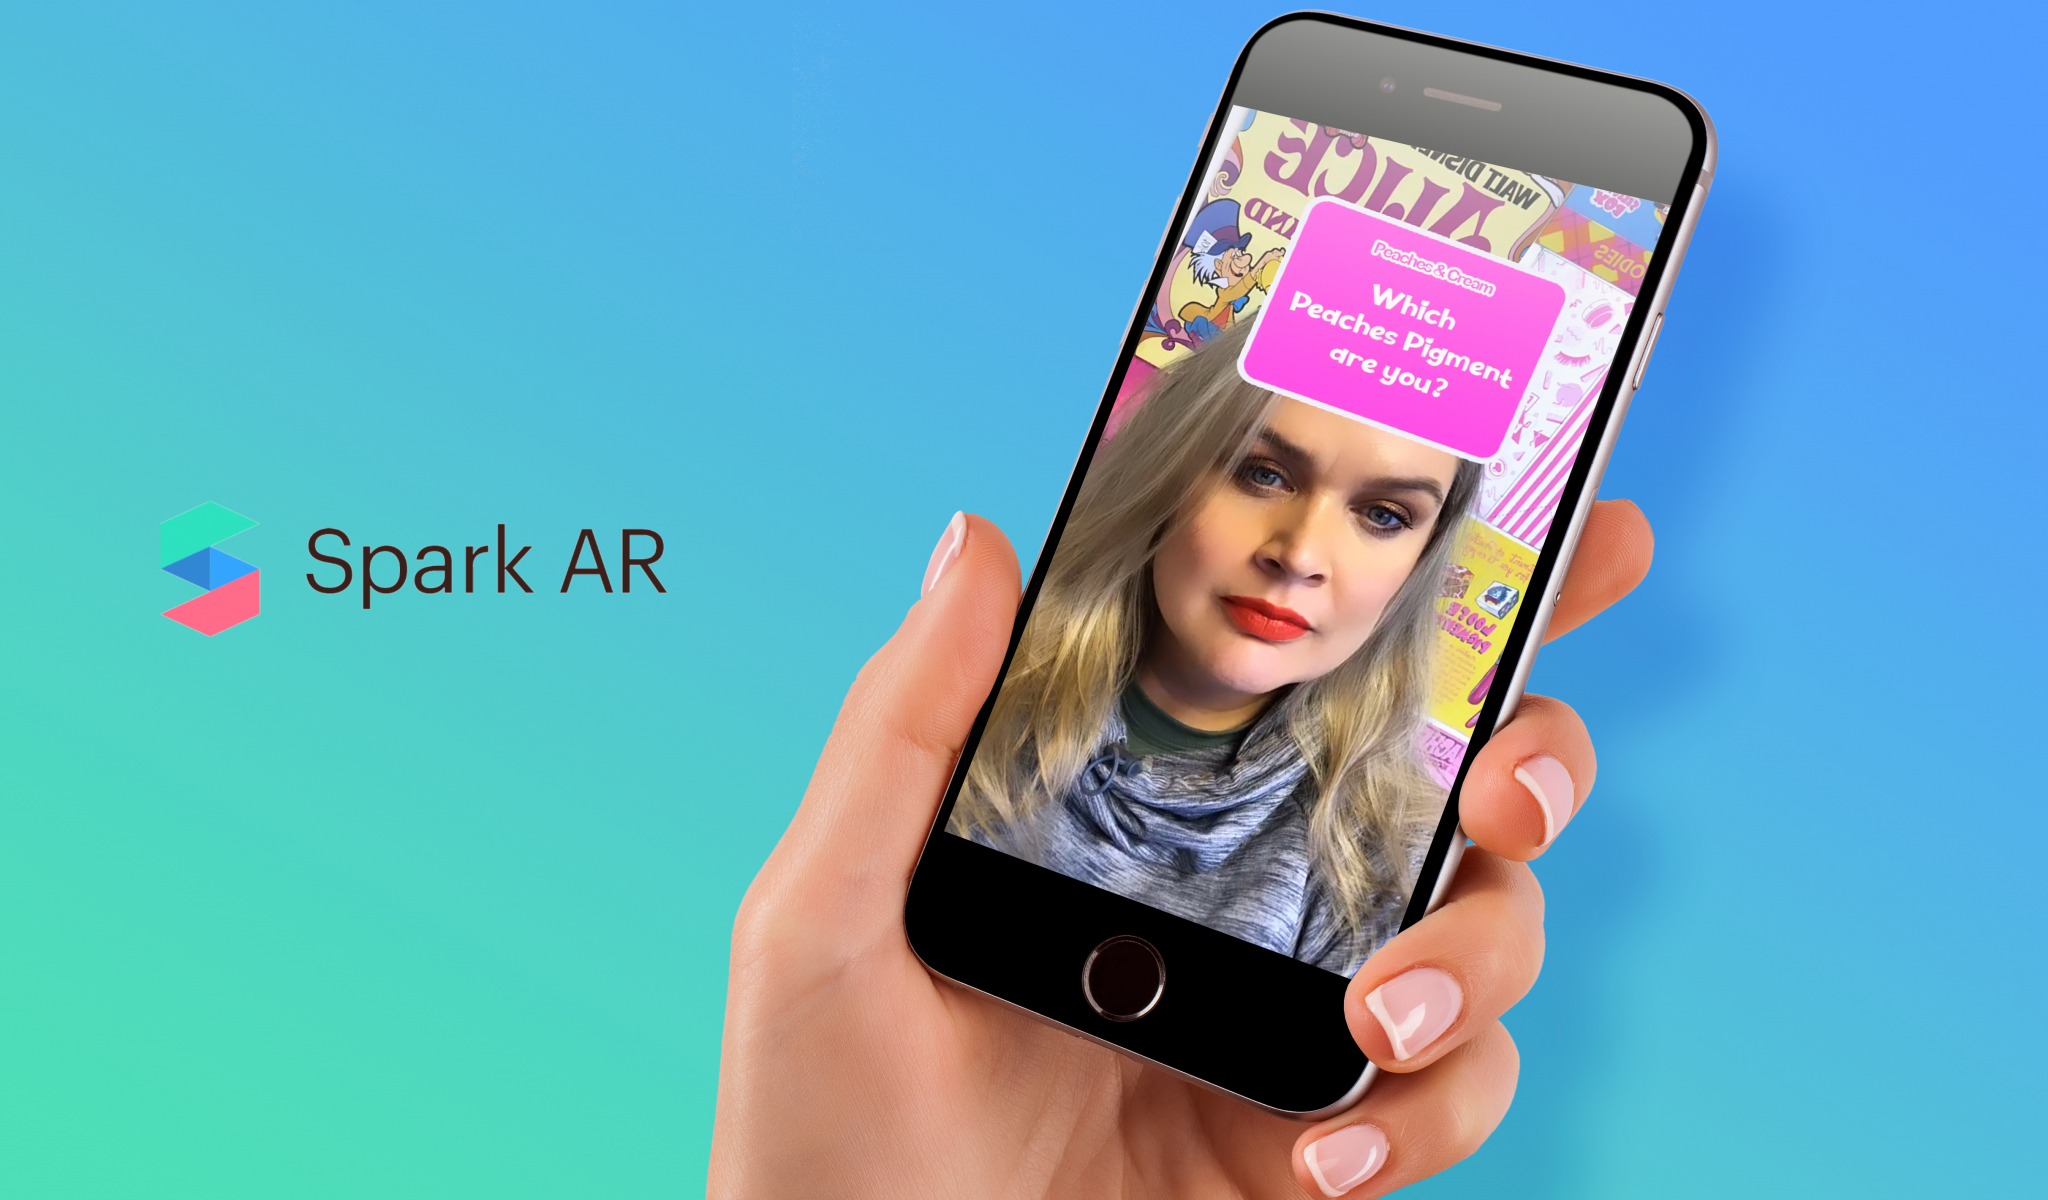 How Organizations Can Utilize Spark AR Impacts for Instagram?